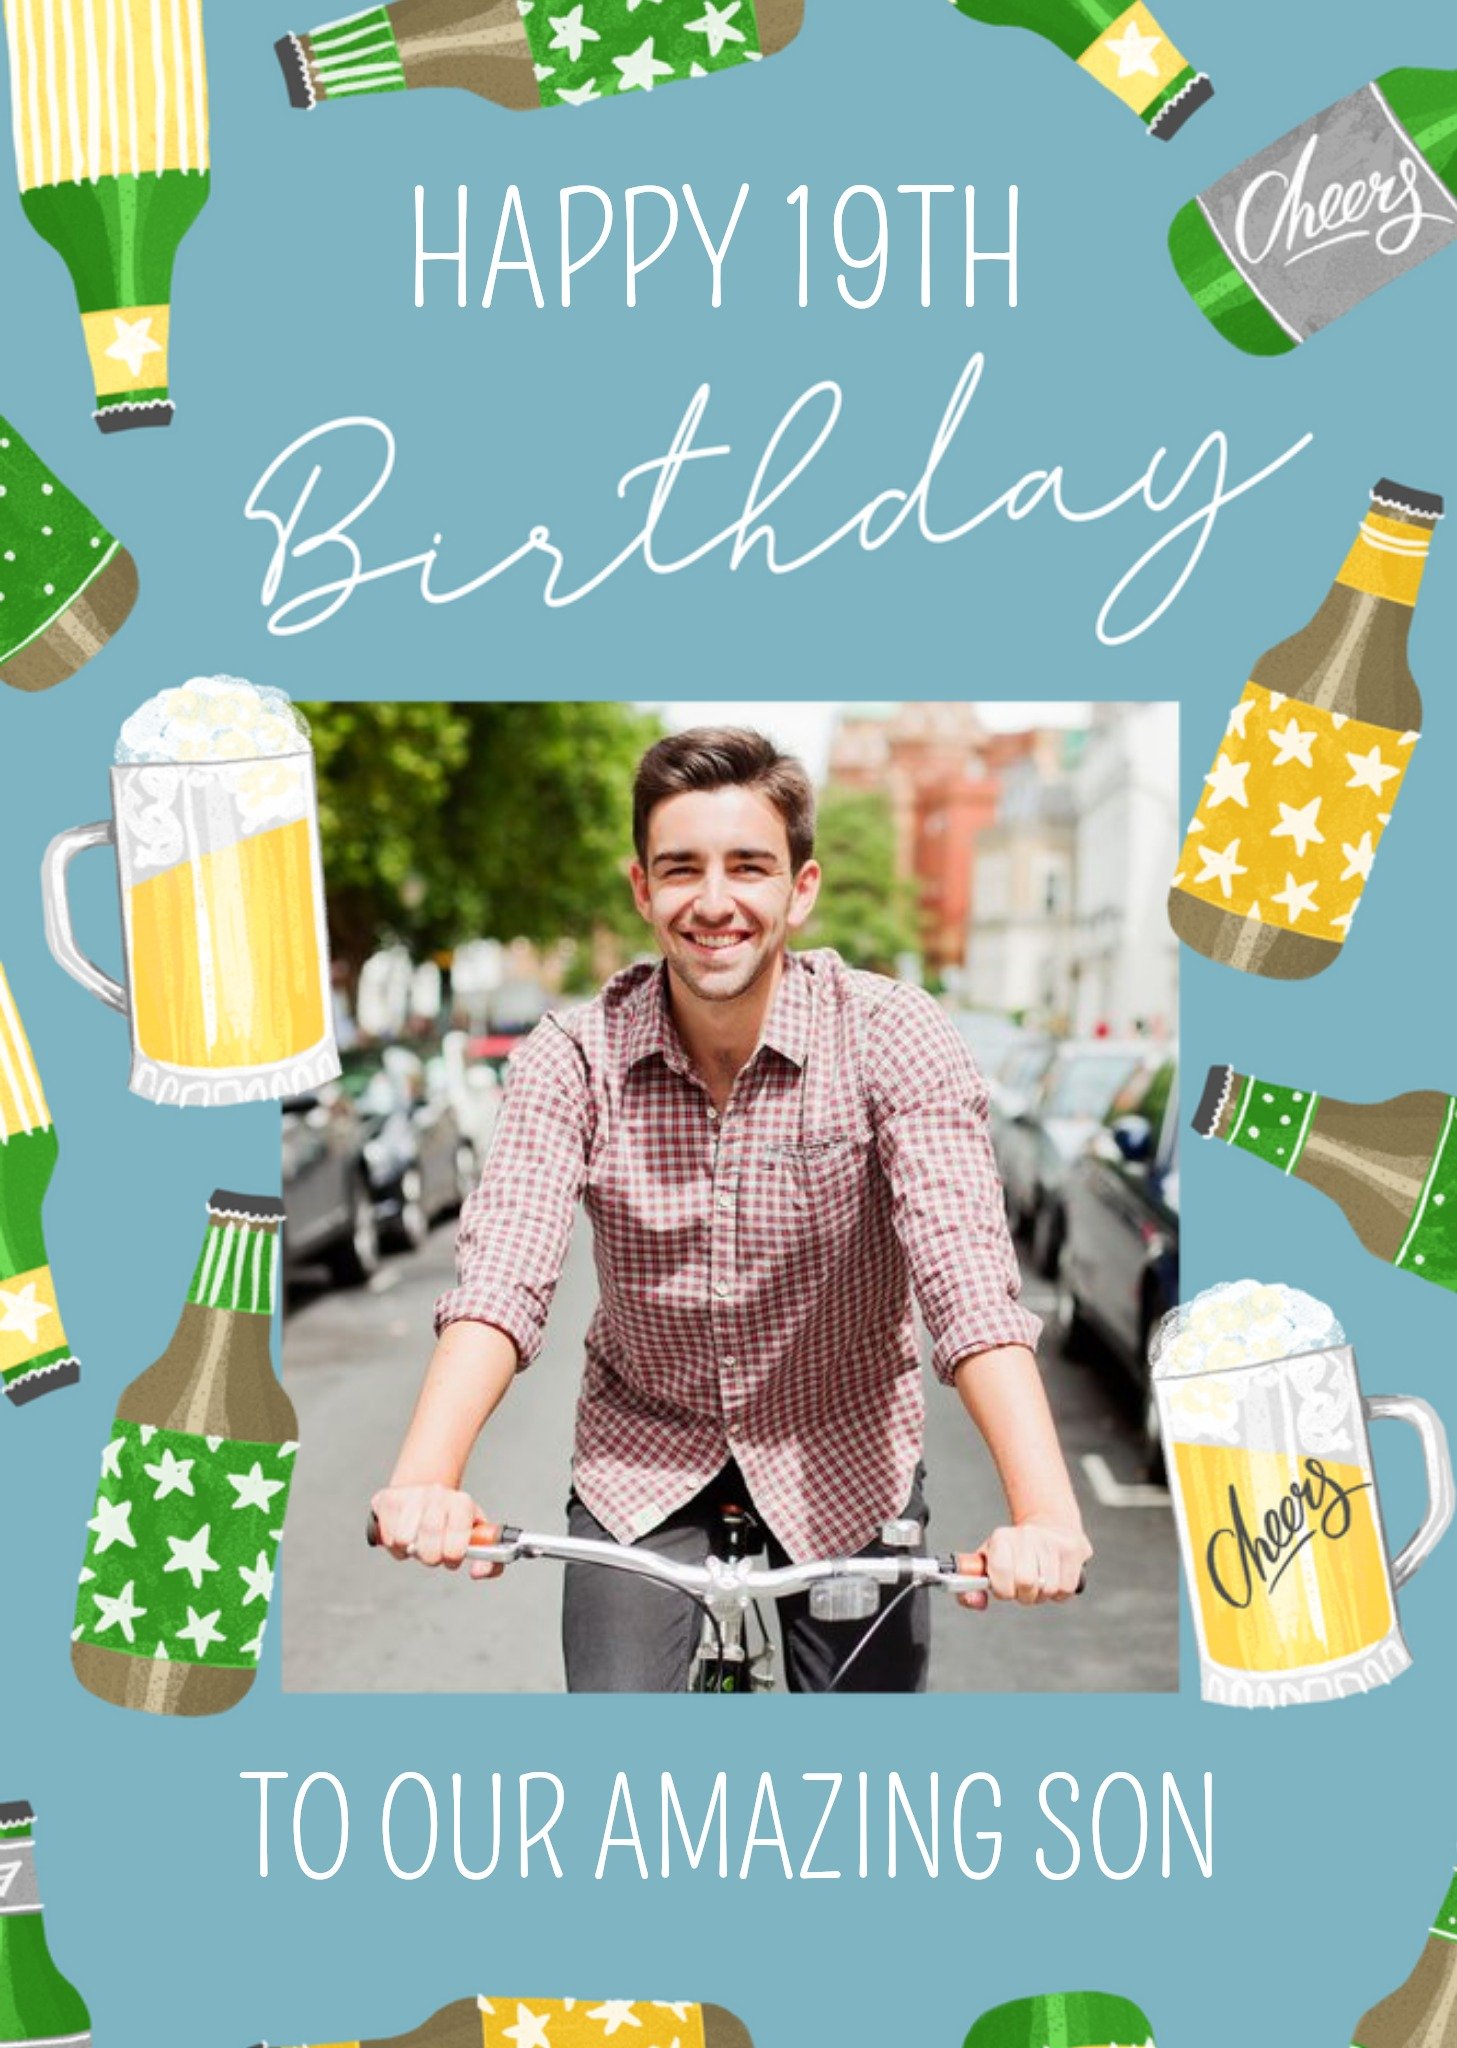 Making Meadows Beer Illustrations Photo Upload Amazing Son Birthday Card, Large